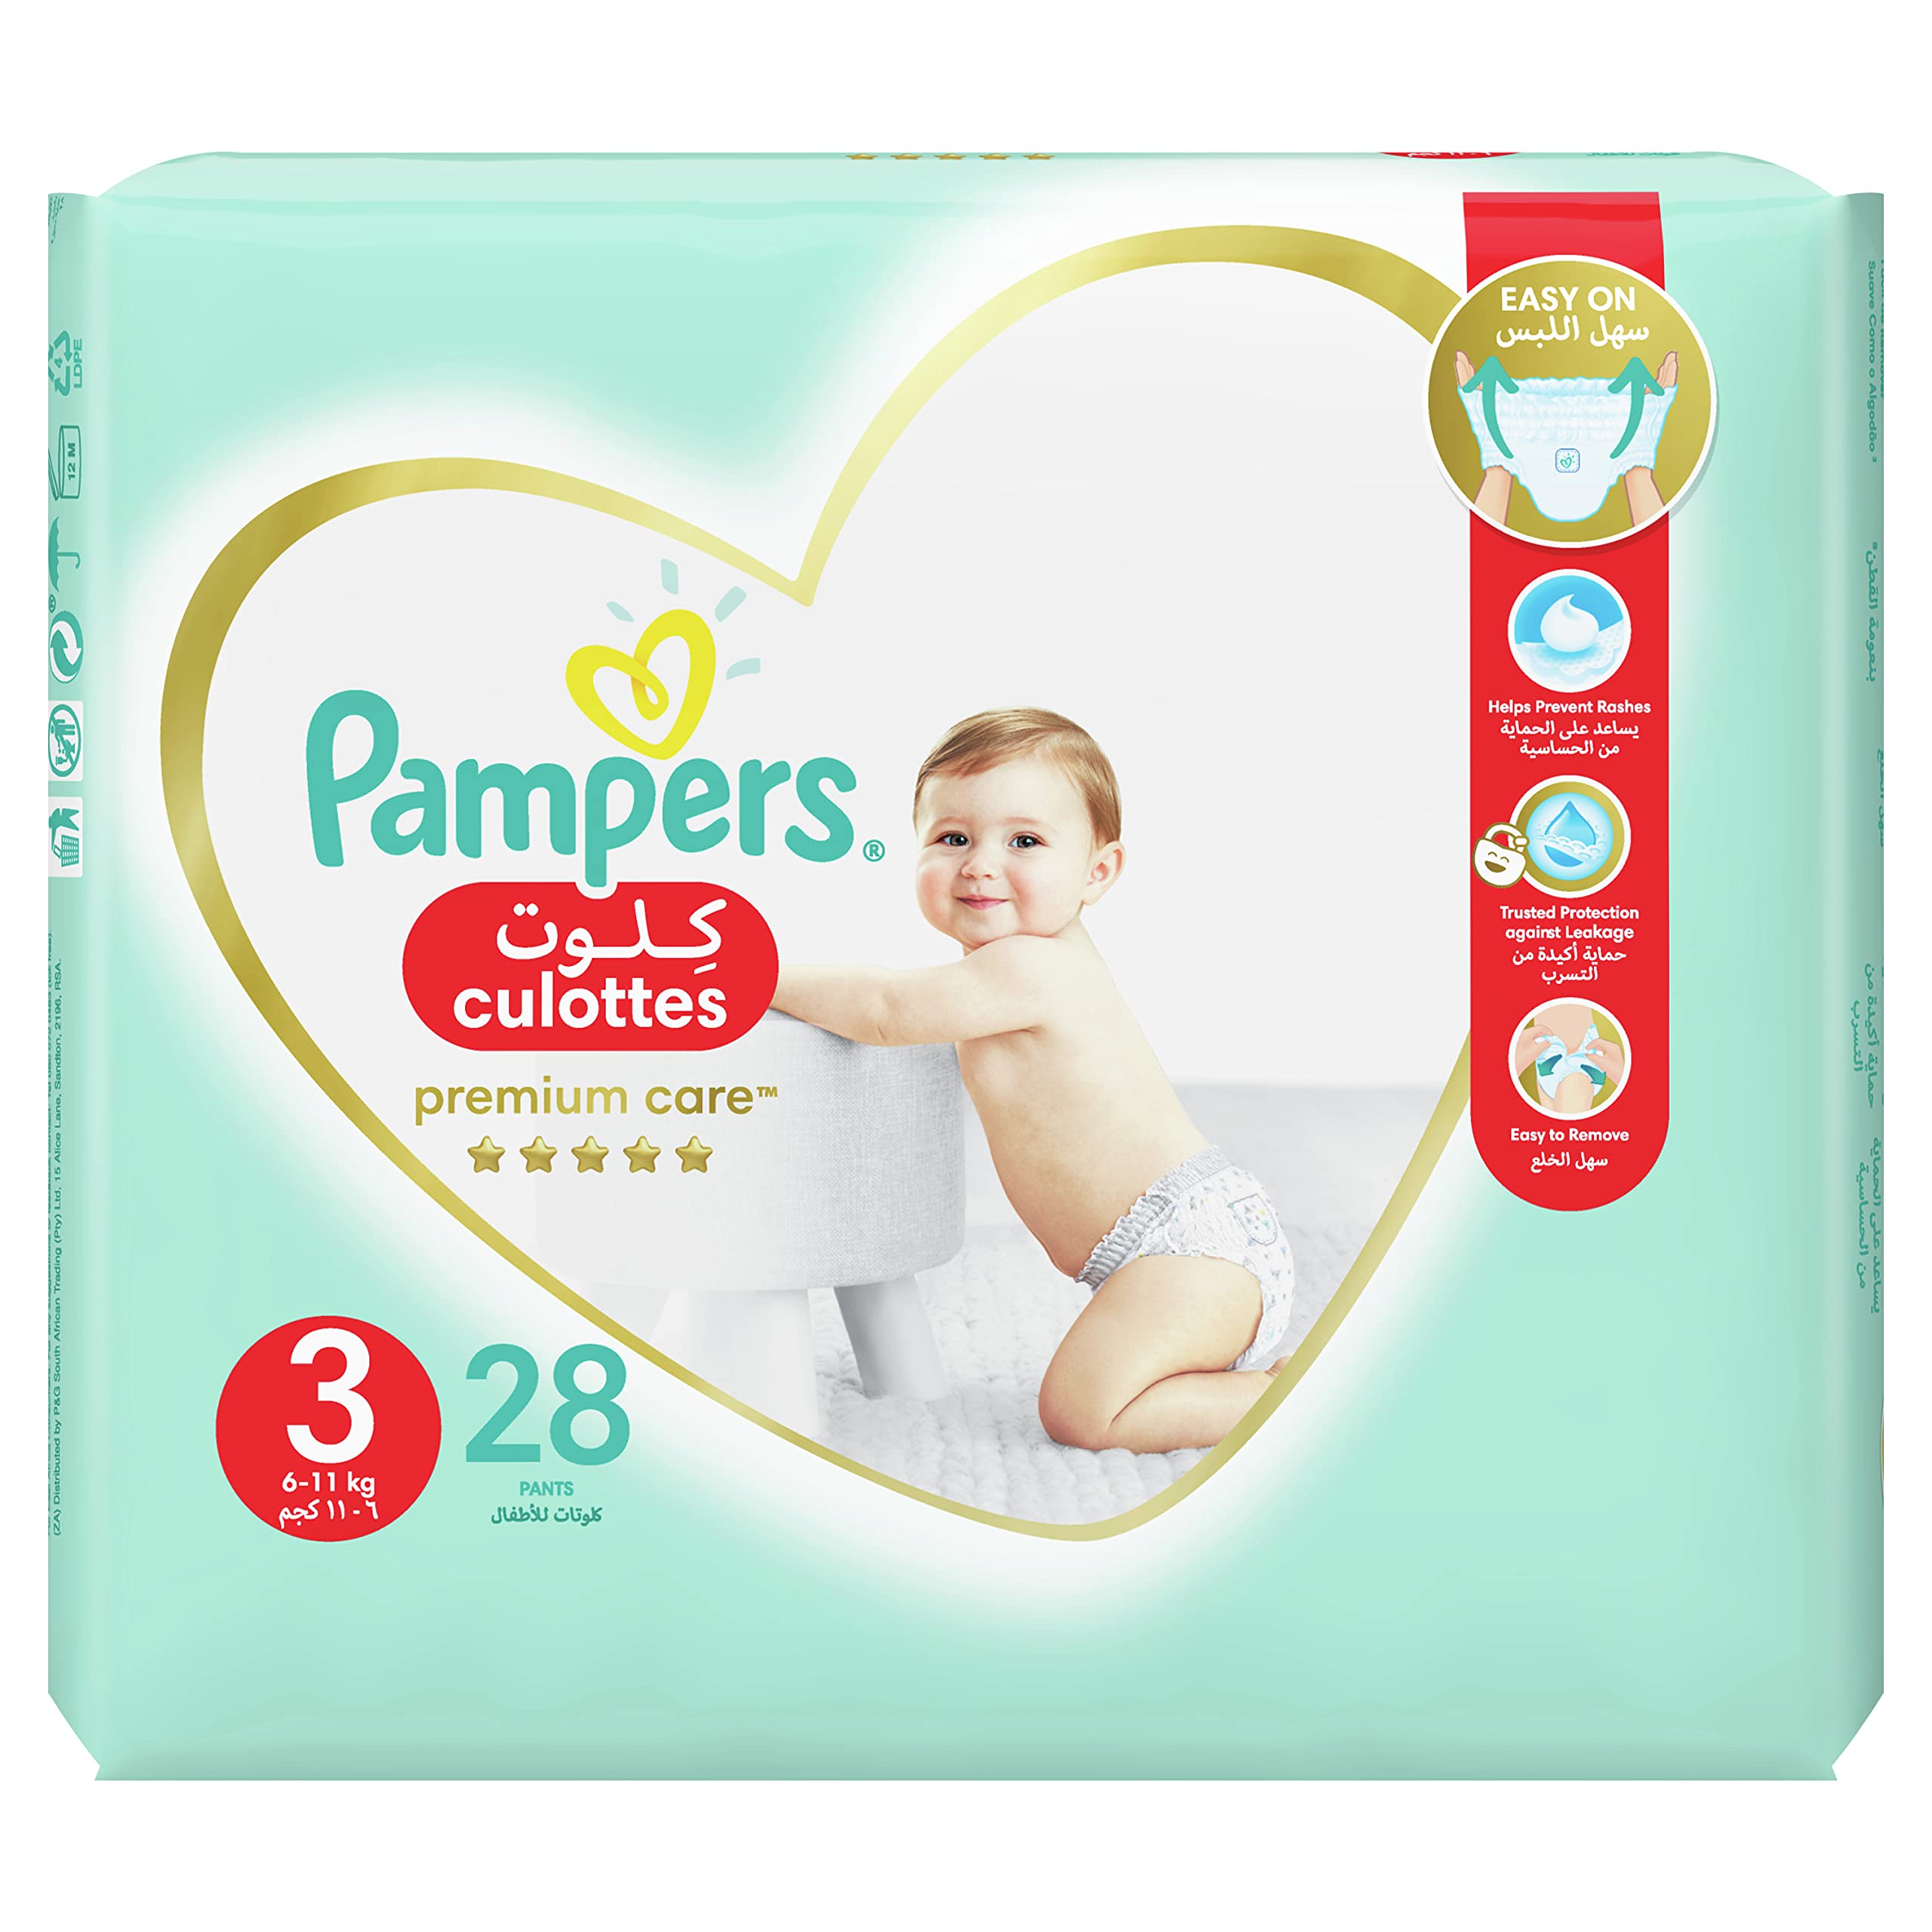 sklad chusteczrk nawilzanych pampers natural clean fragrance feee